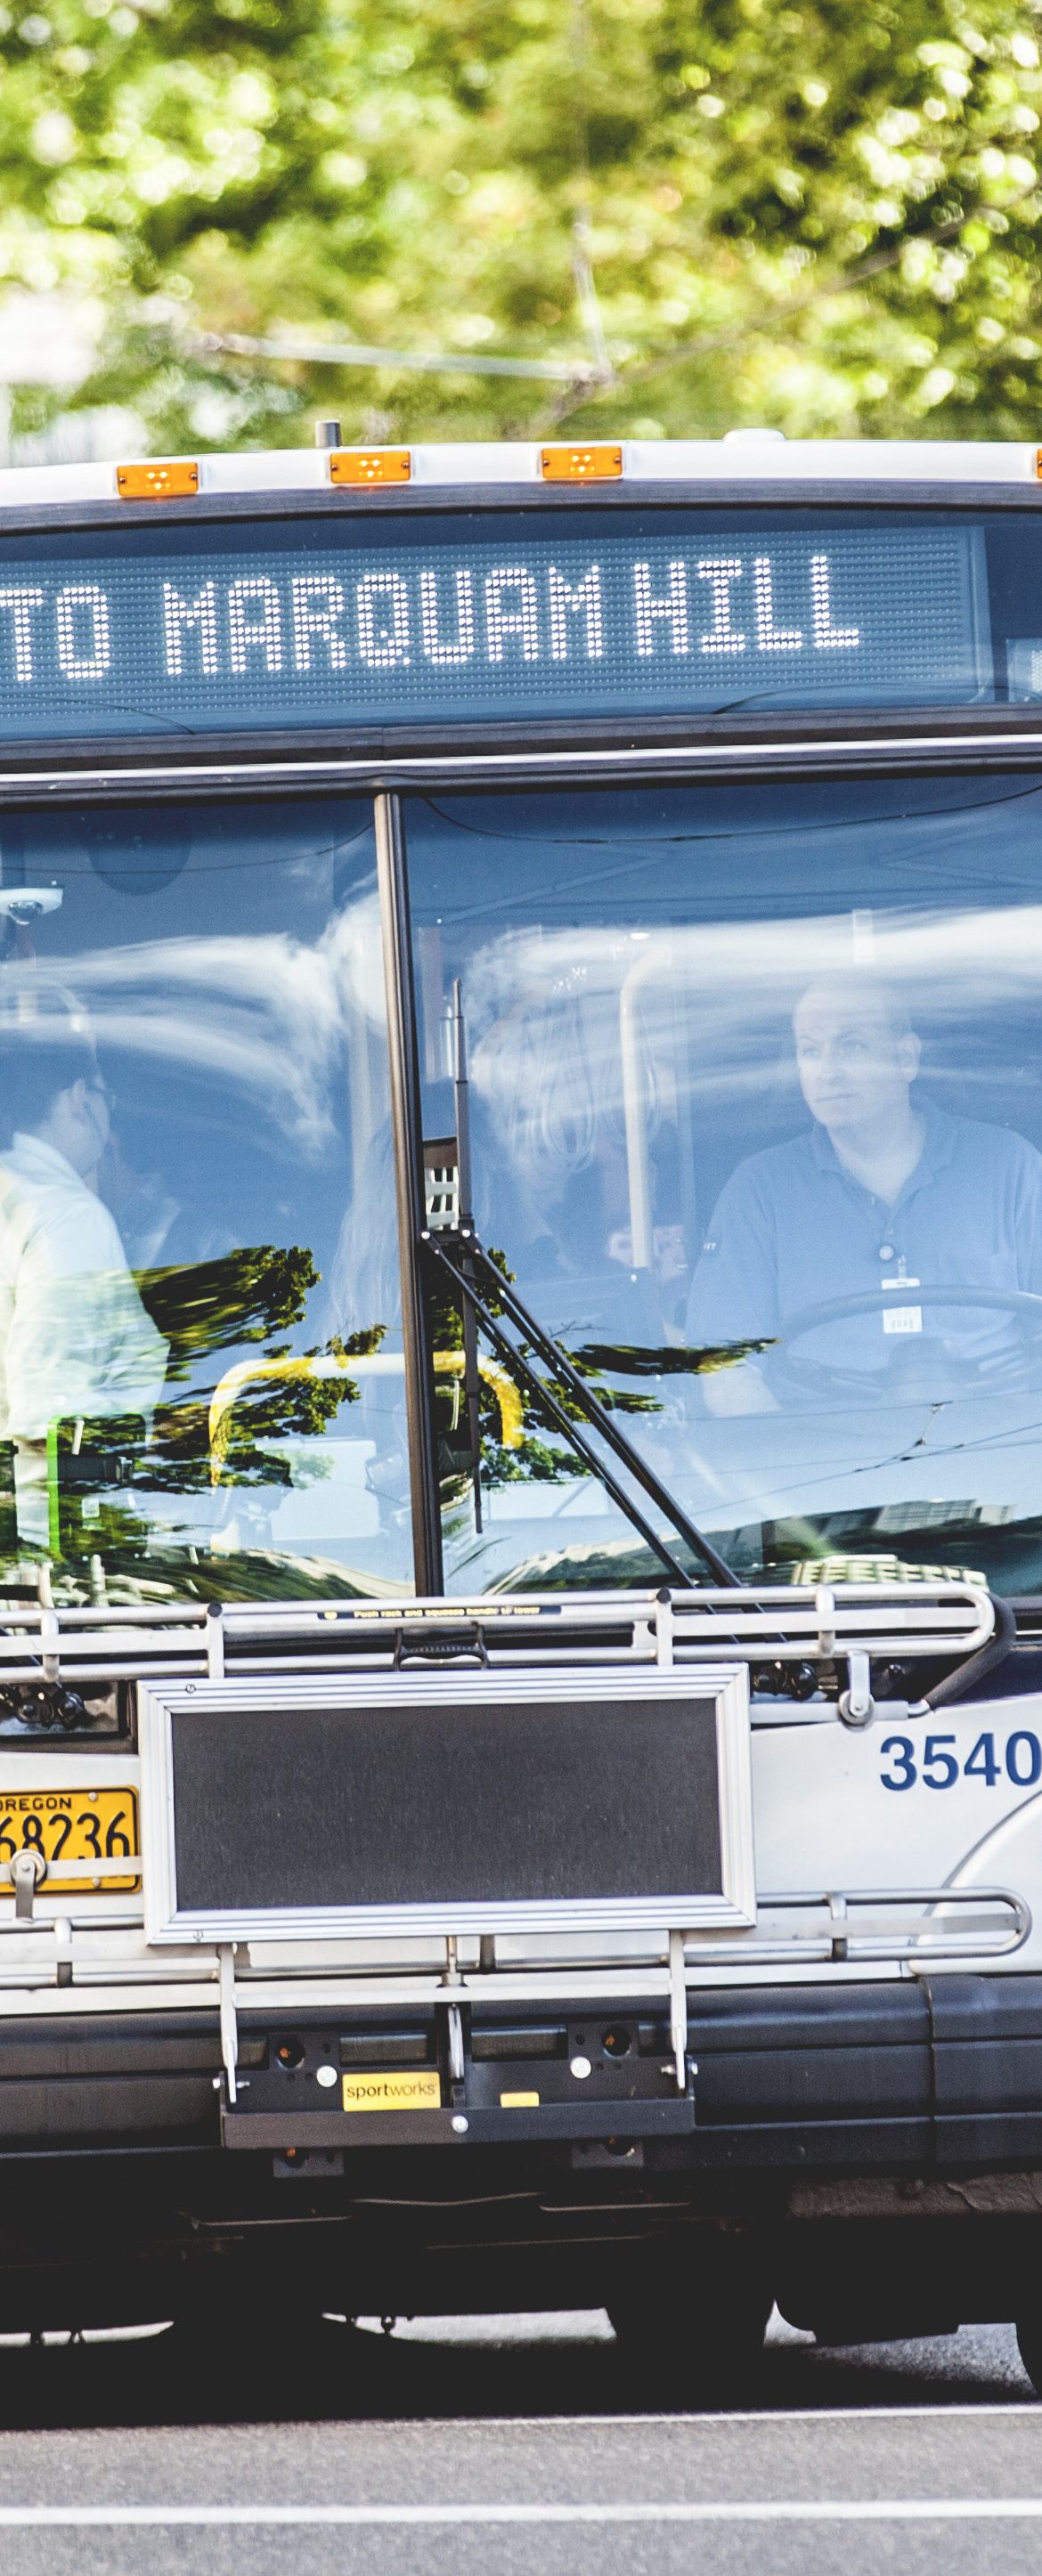 A passenger hops onto a bus on a sunny day